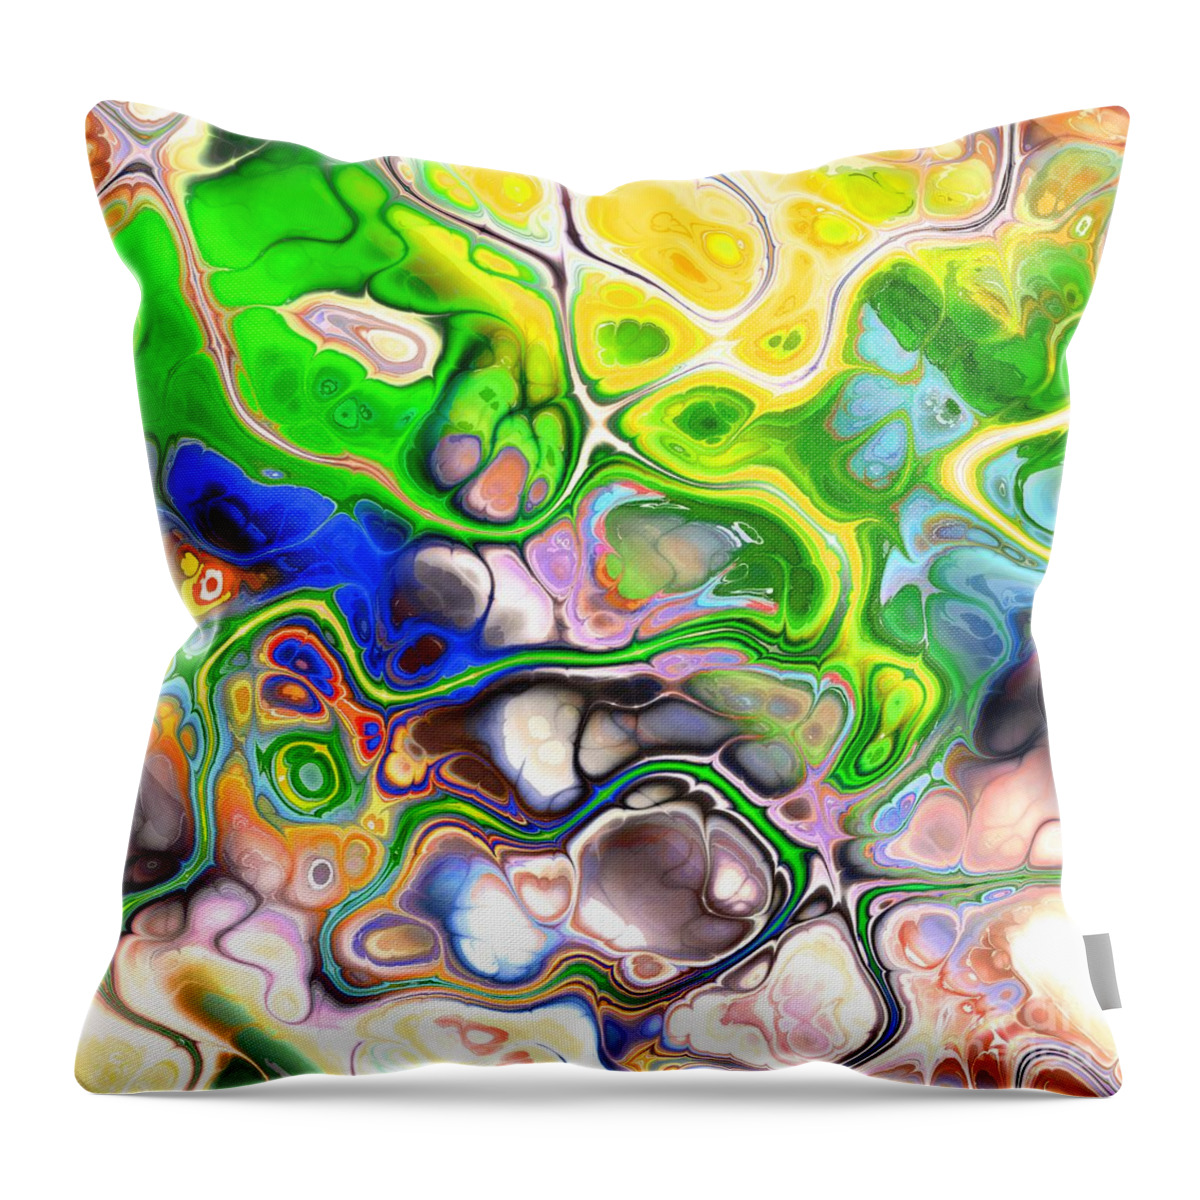 Colorful Throw Pillow featuring the digital art Paijo - Funky Artistic Colorful Abstract Marble Fluid Digital Art by Sambel Pedes